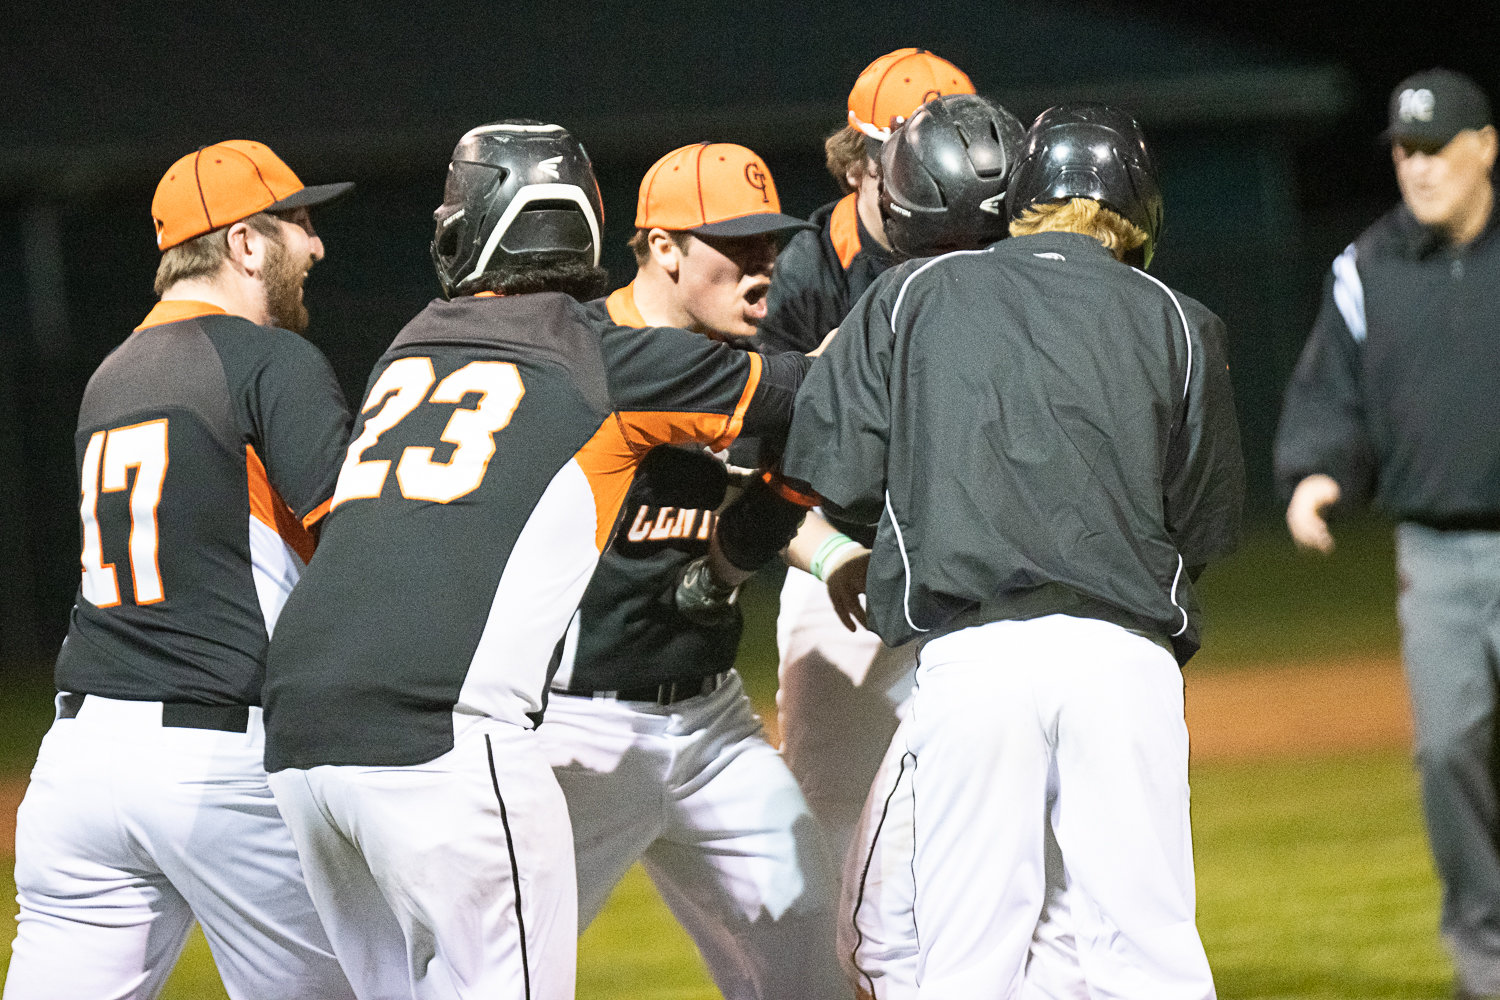 Centralia players mob Moshie Eports-Tartios after his walk-off sacrifice fly gave the Tigers a 14-13 win over Aberdeen on March 21.